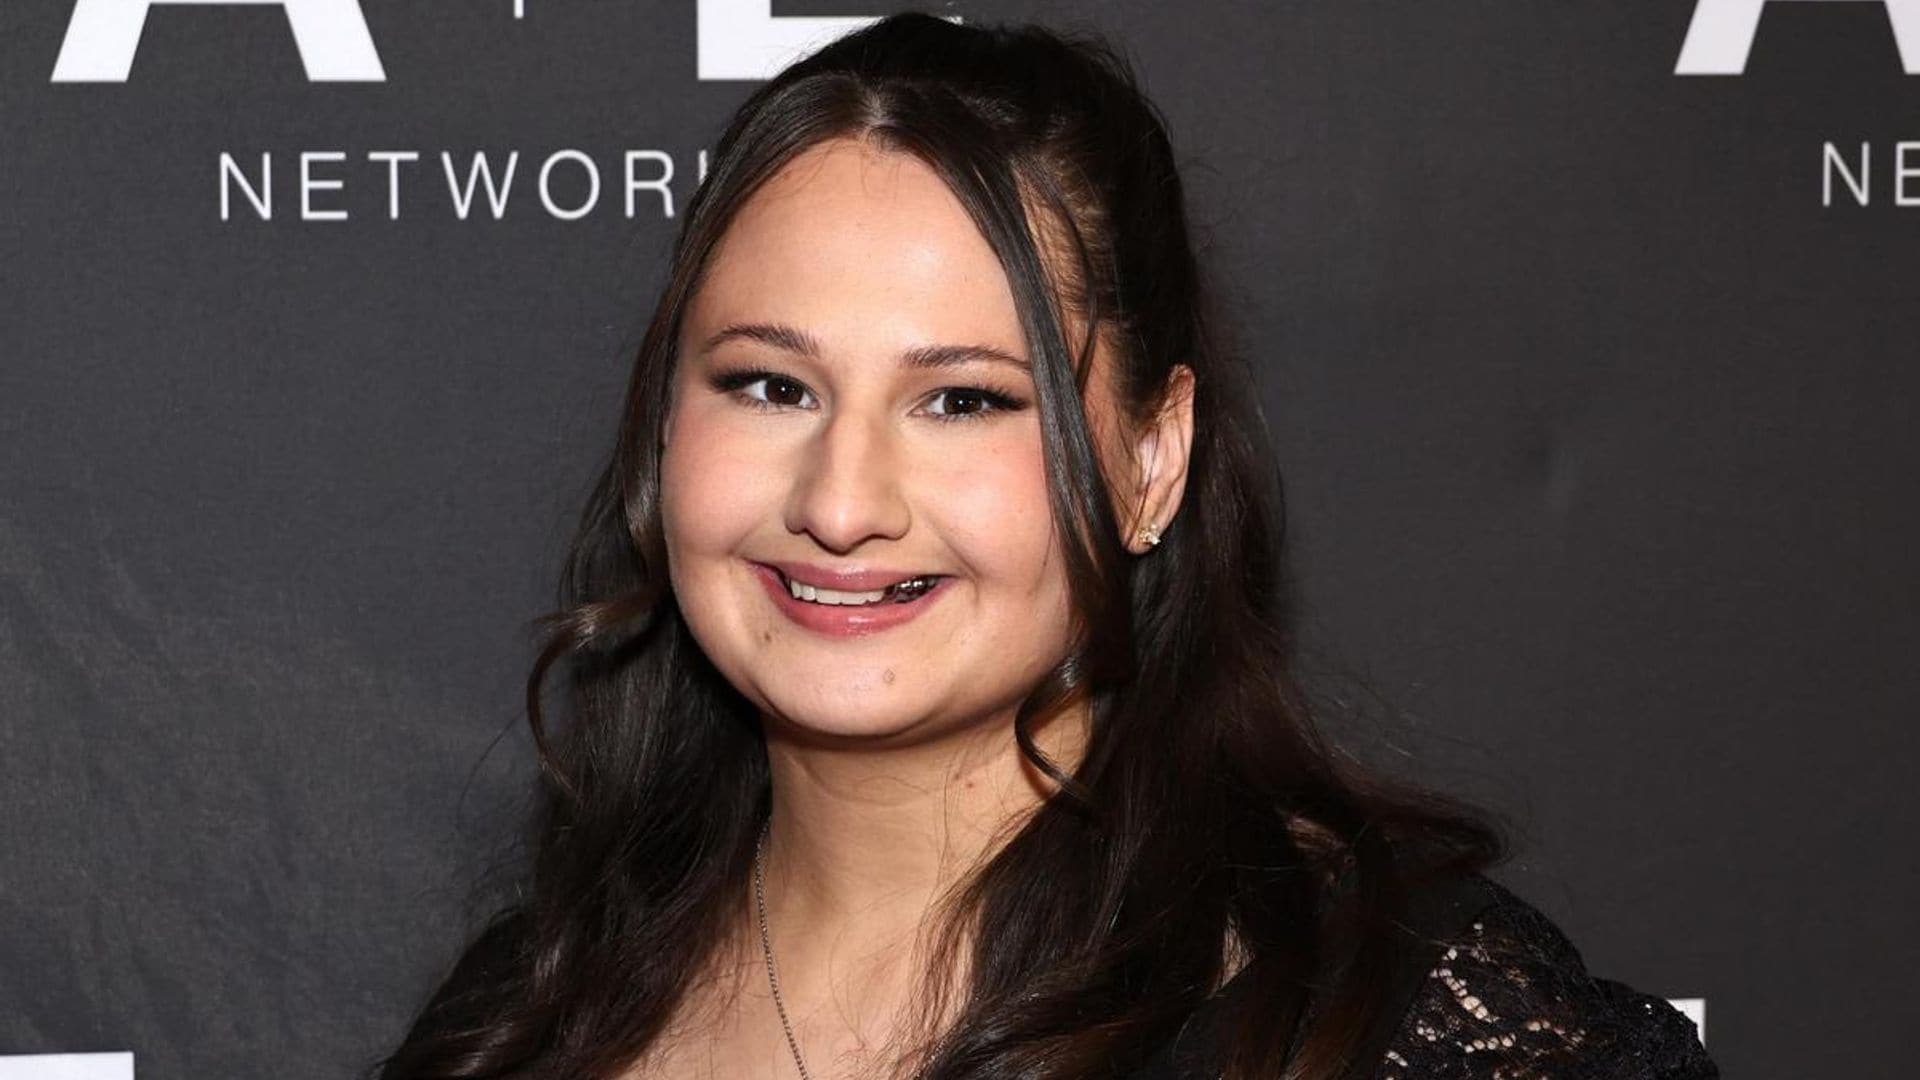 Gypsy Rose Blanchard will get plastic surgery: What part of her body is she changing?